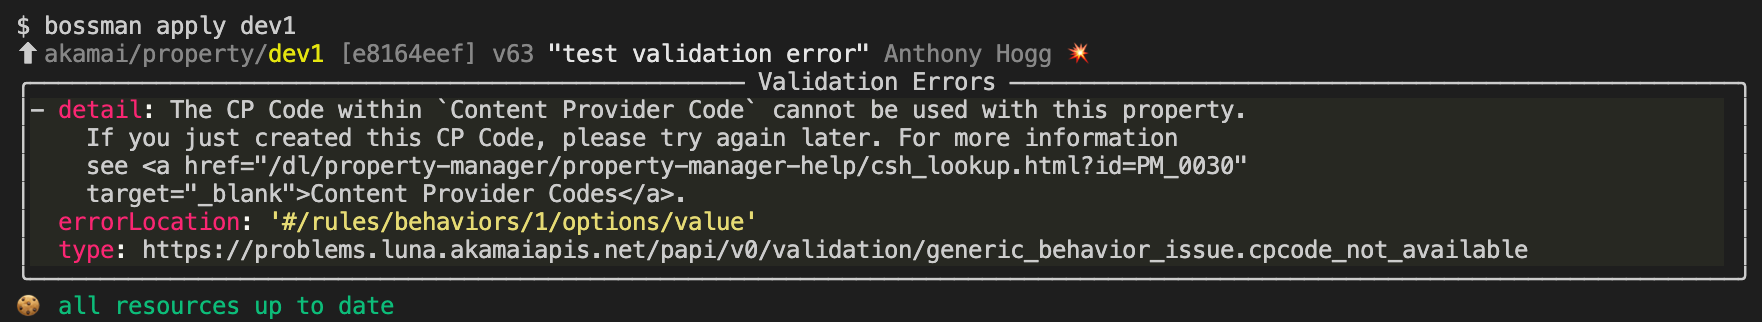 ../../_images/apply_validation_errors.png